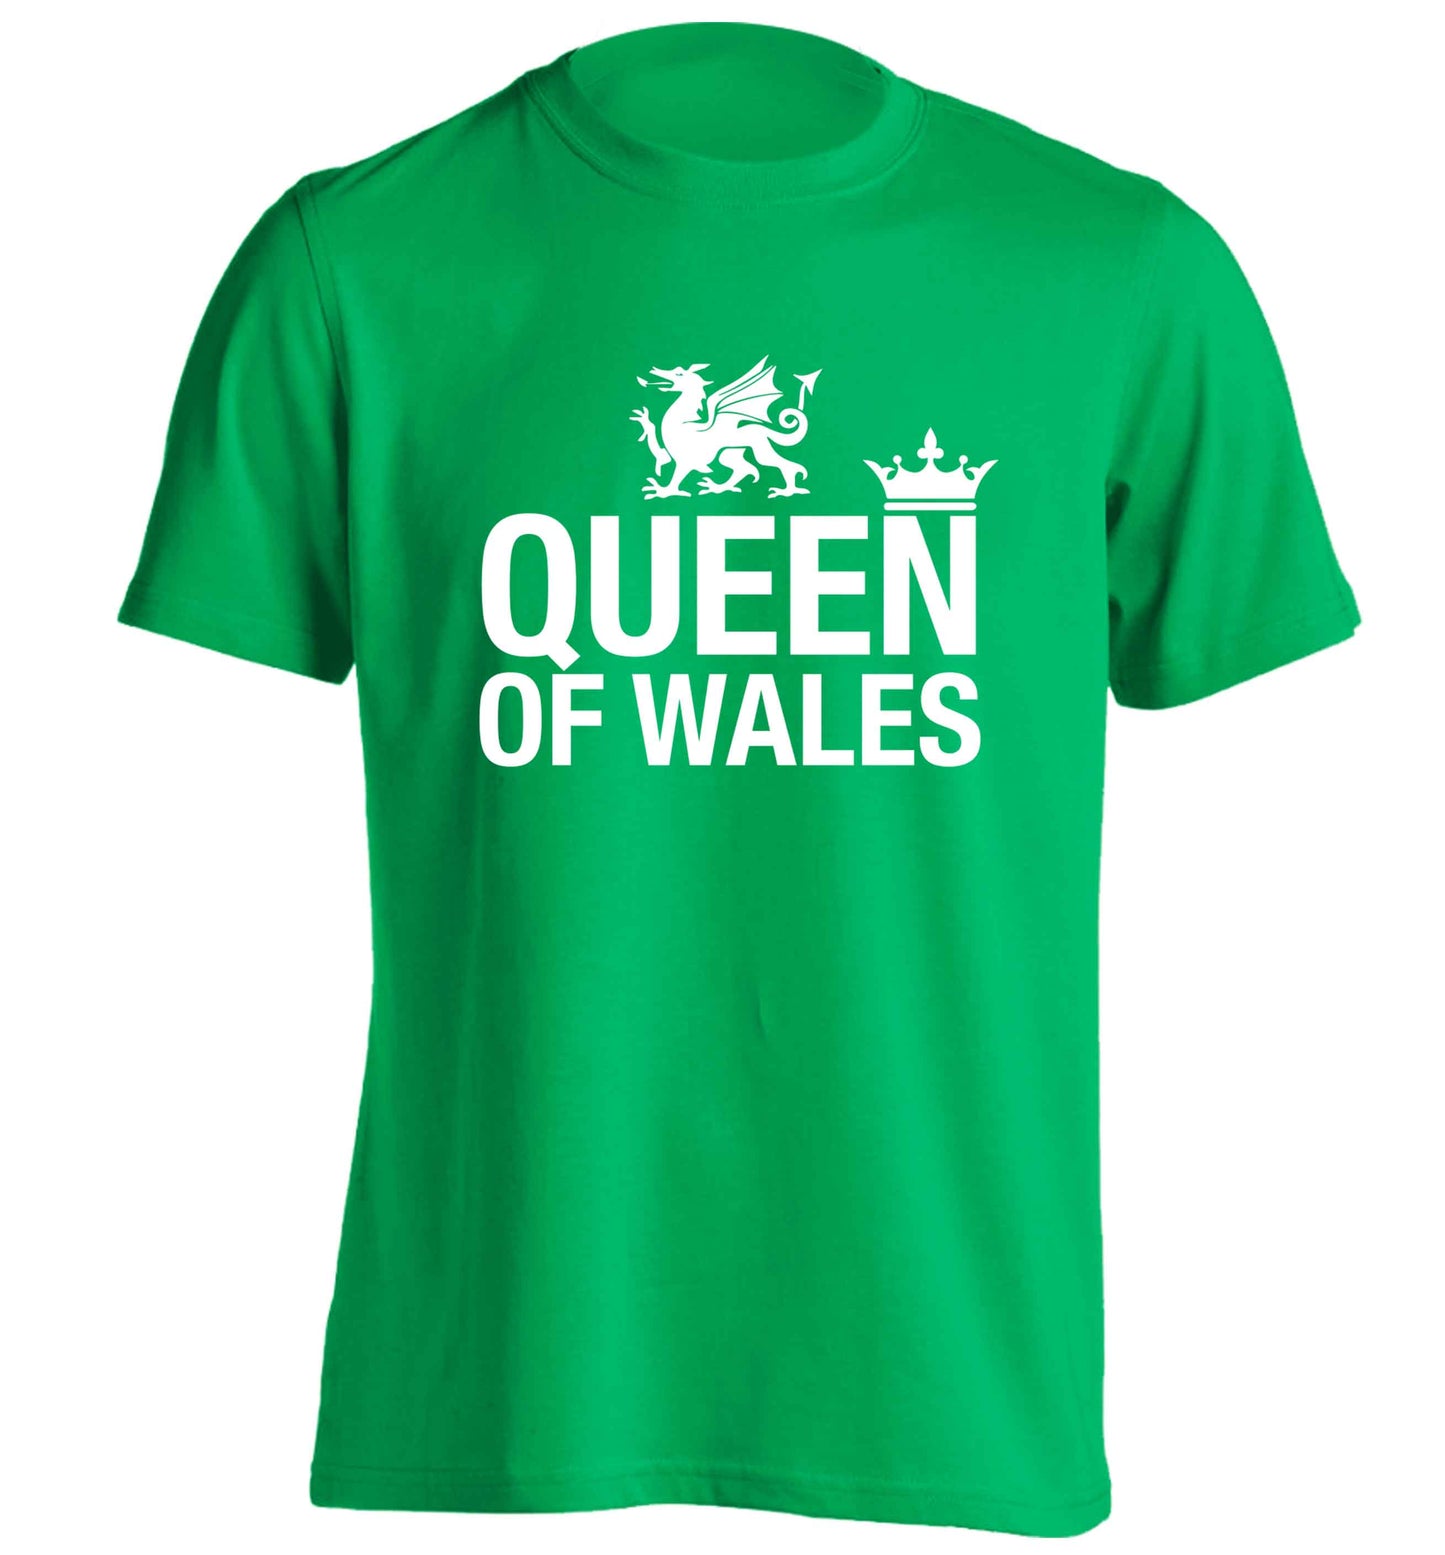 Queen of Wales adults unisex green Tshirt 2XL